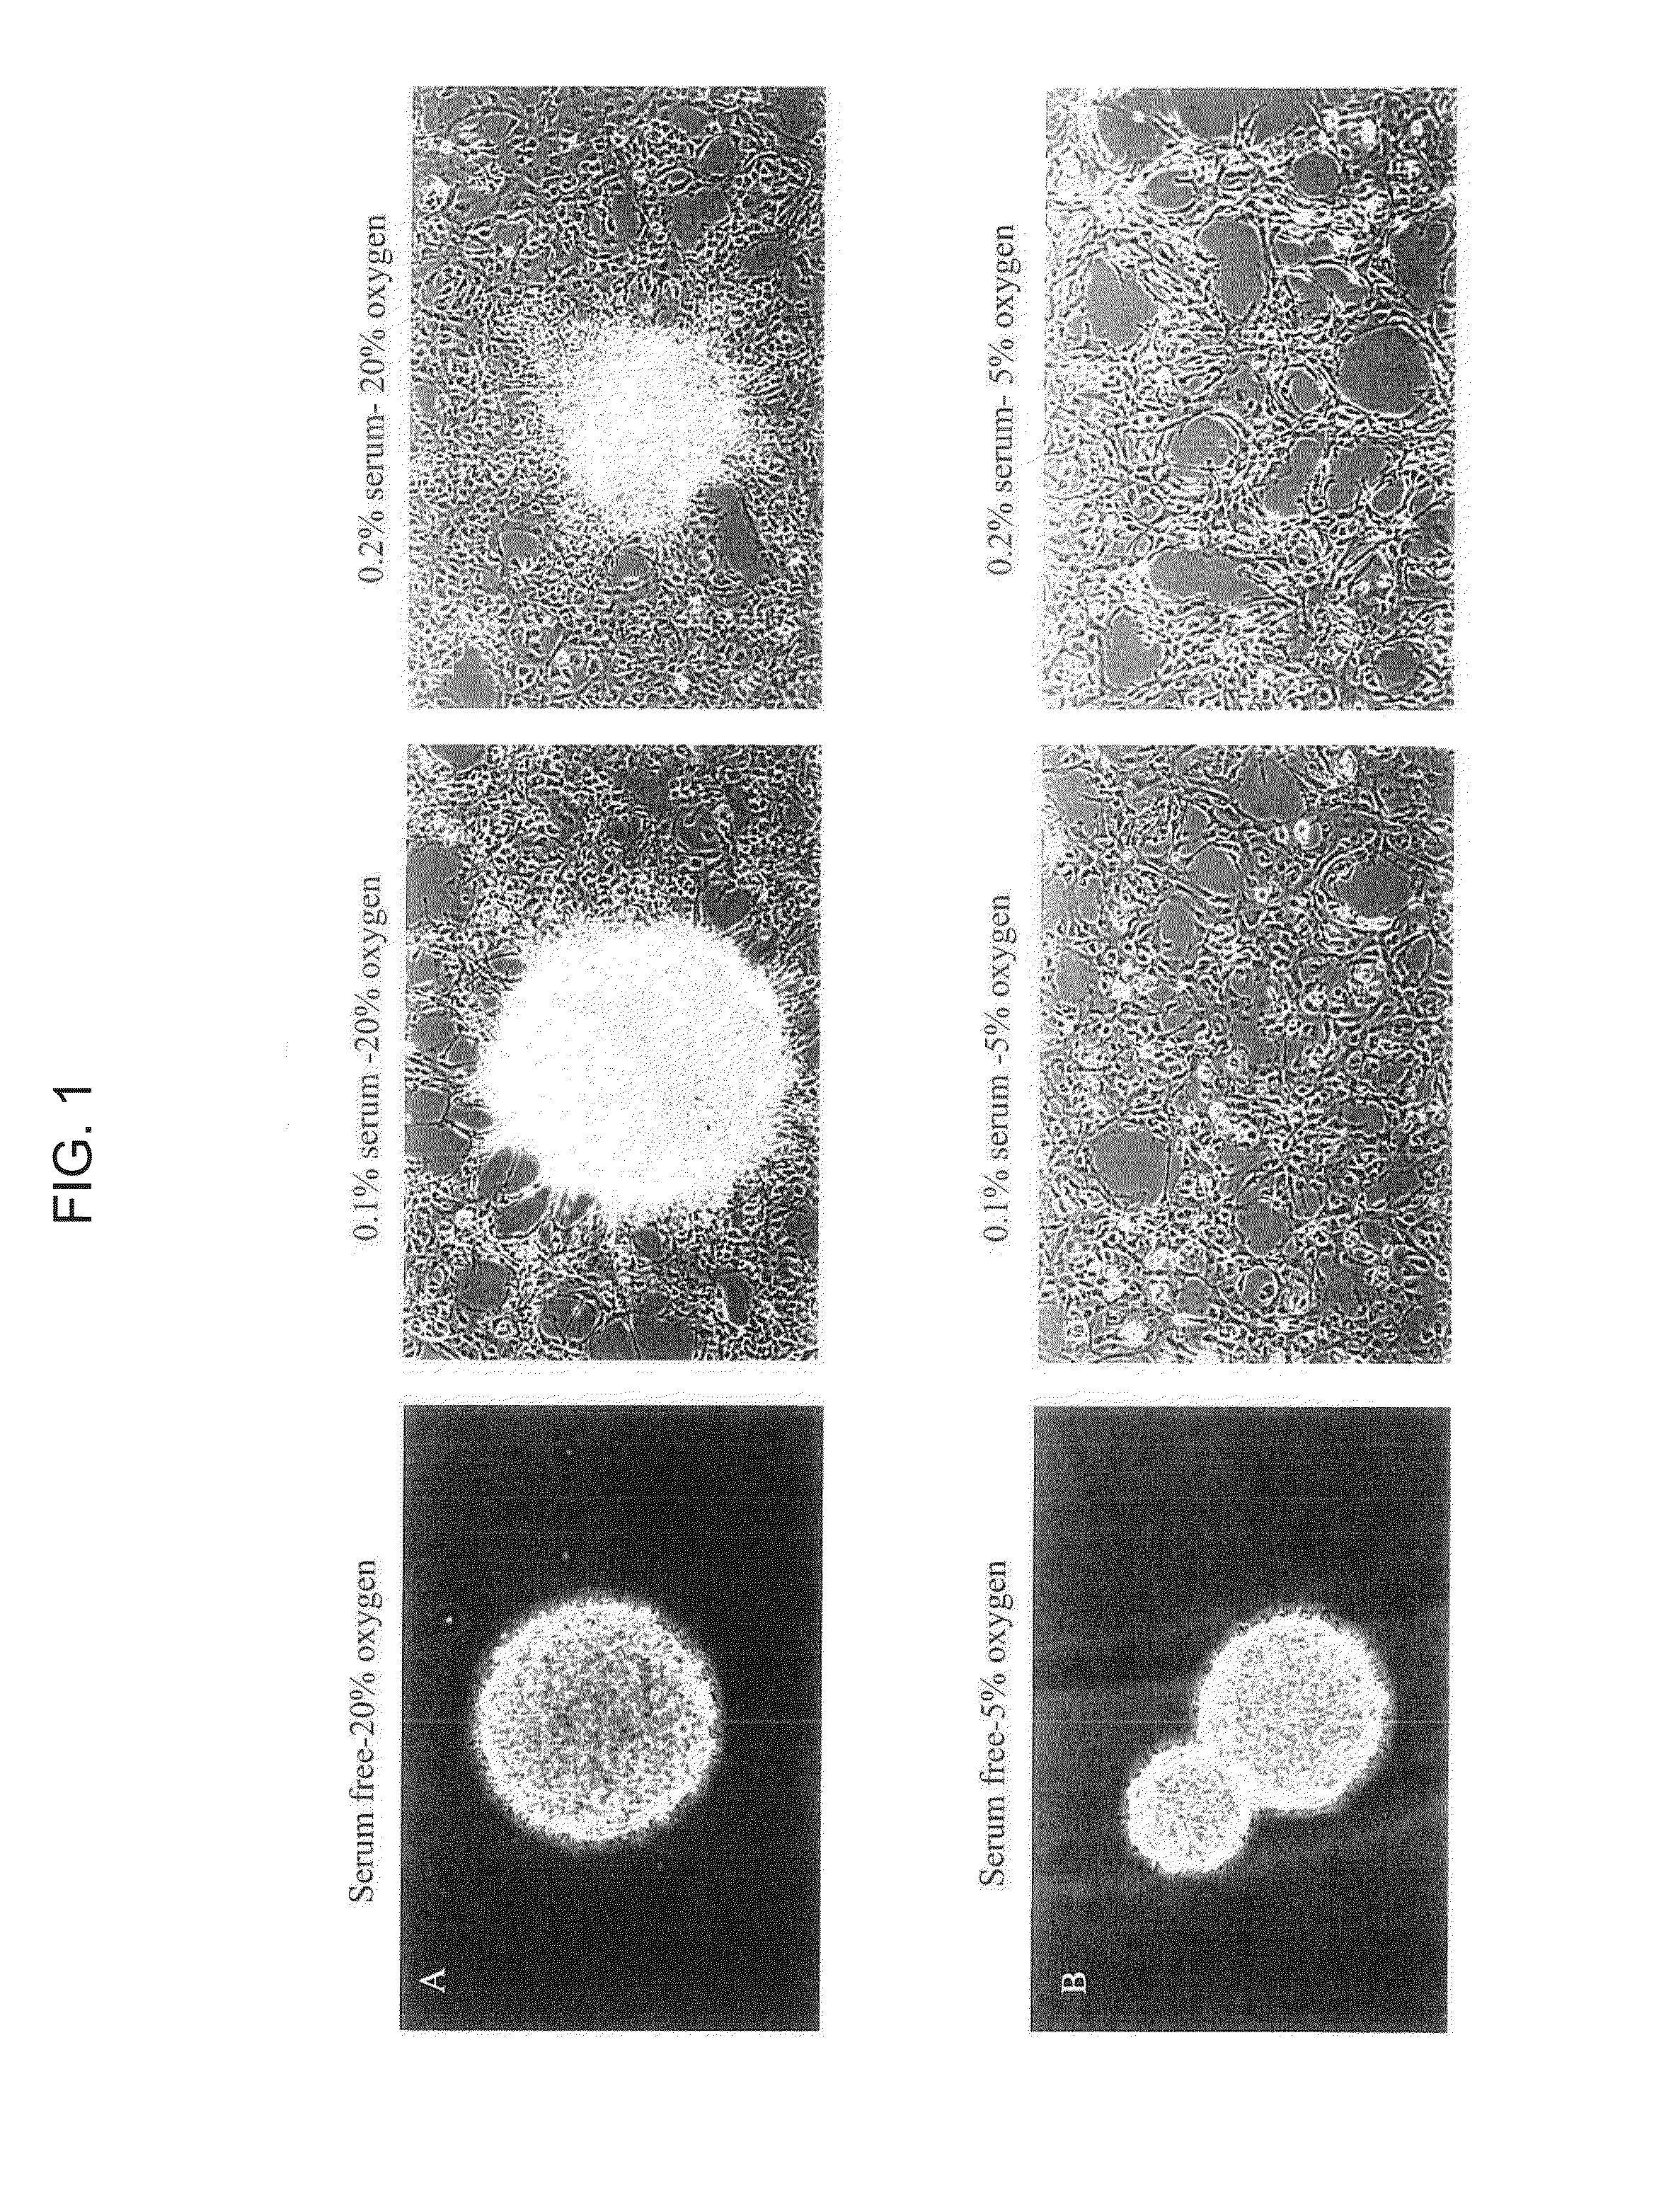 Stem cells and methods incorporating environmental factors as a means for enhancing stem cell proliferation and plasticity